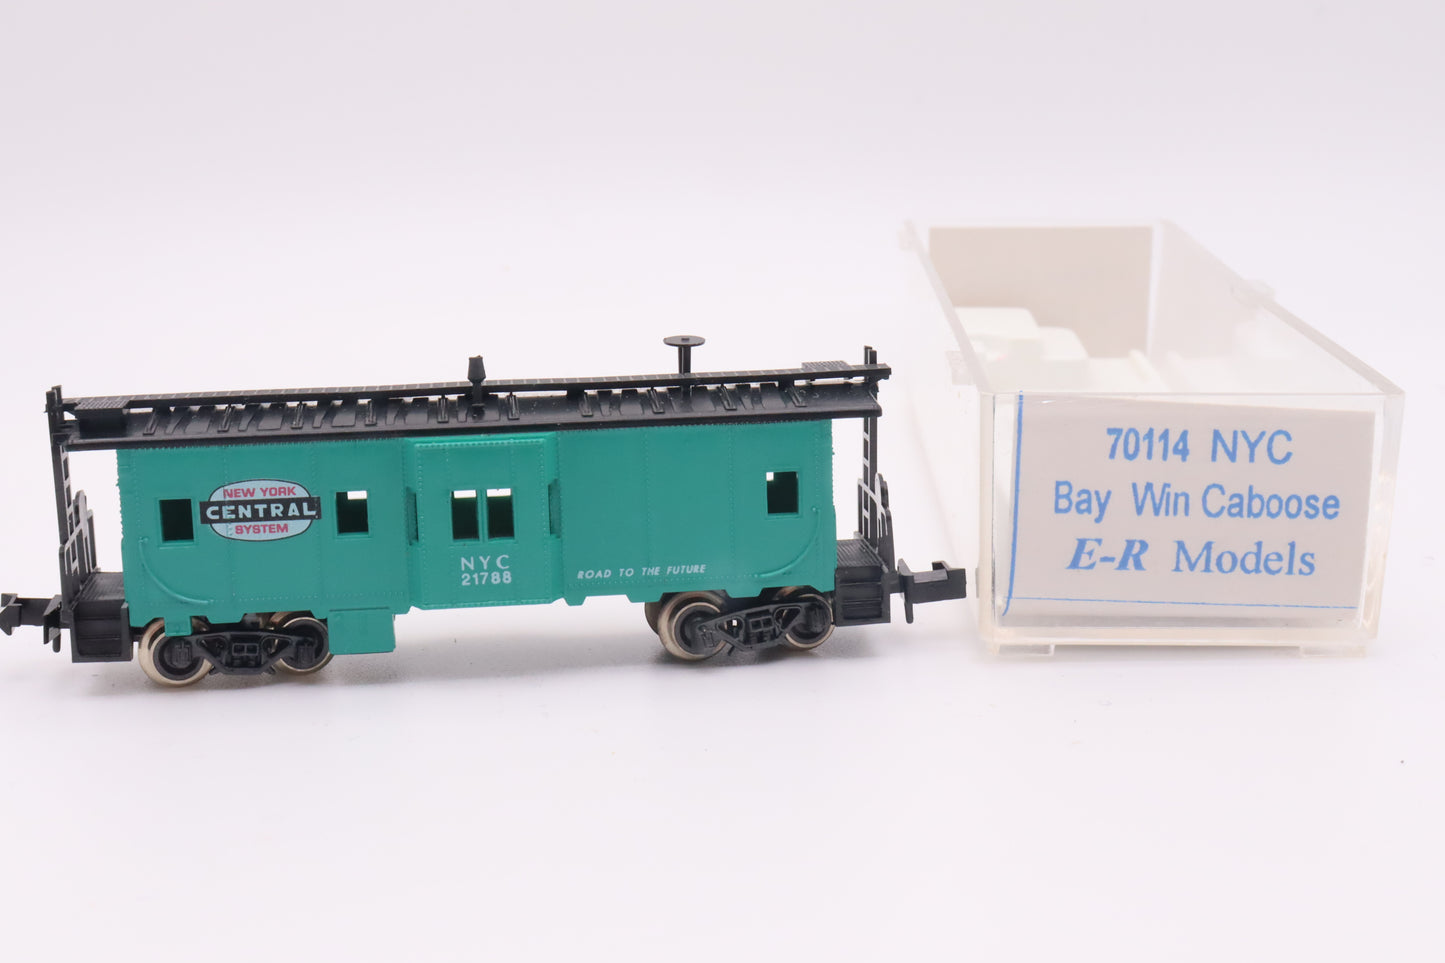 E-R Models - 70114 - Caboose w/Bay Window - New York Central - NYC-21788